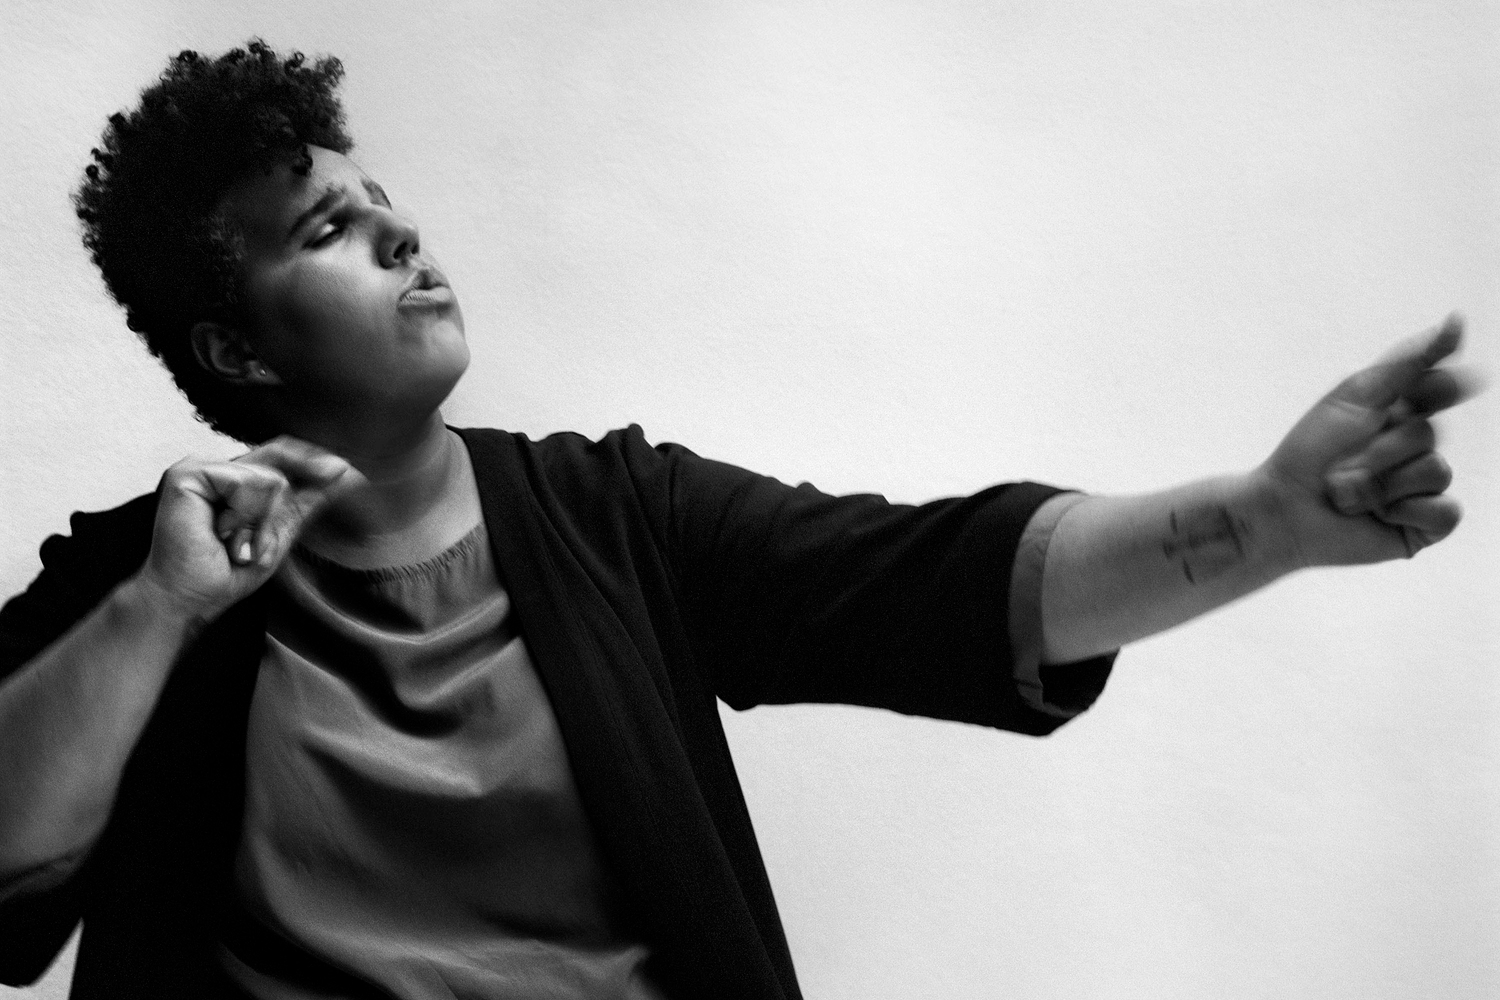 Tracks: Brittany Howard, The Futureheads, King Gizzard and the Lizard Wizard and more